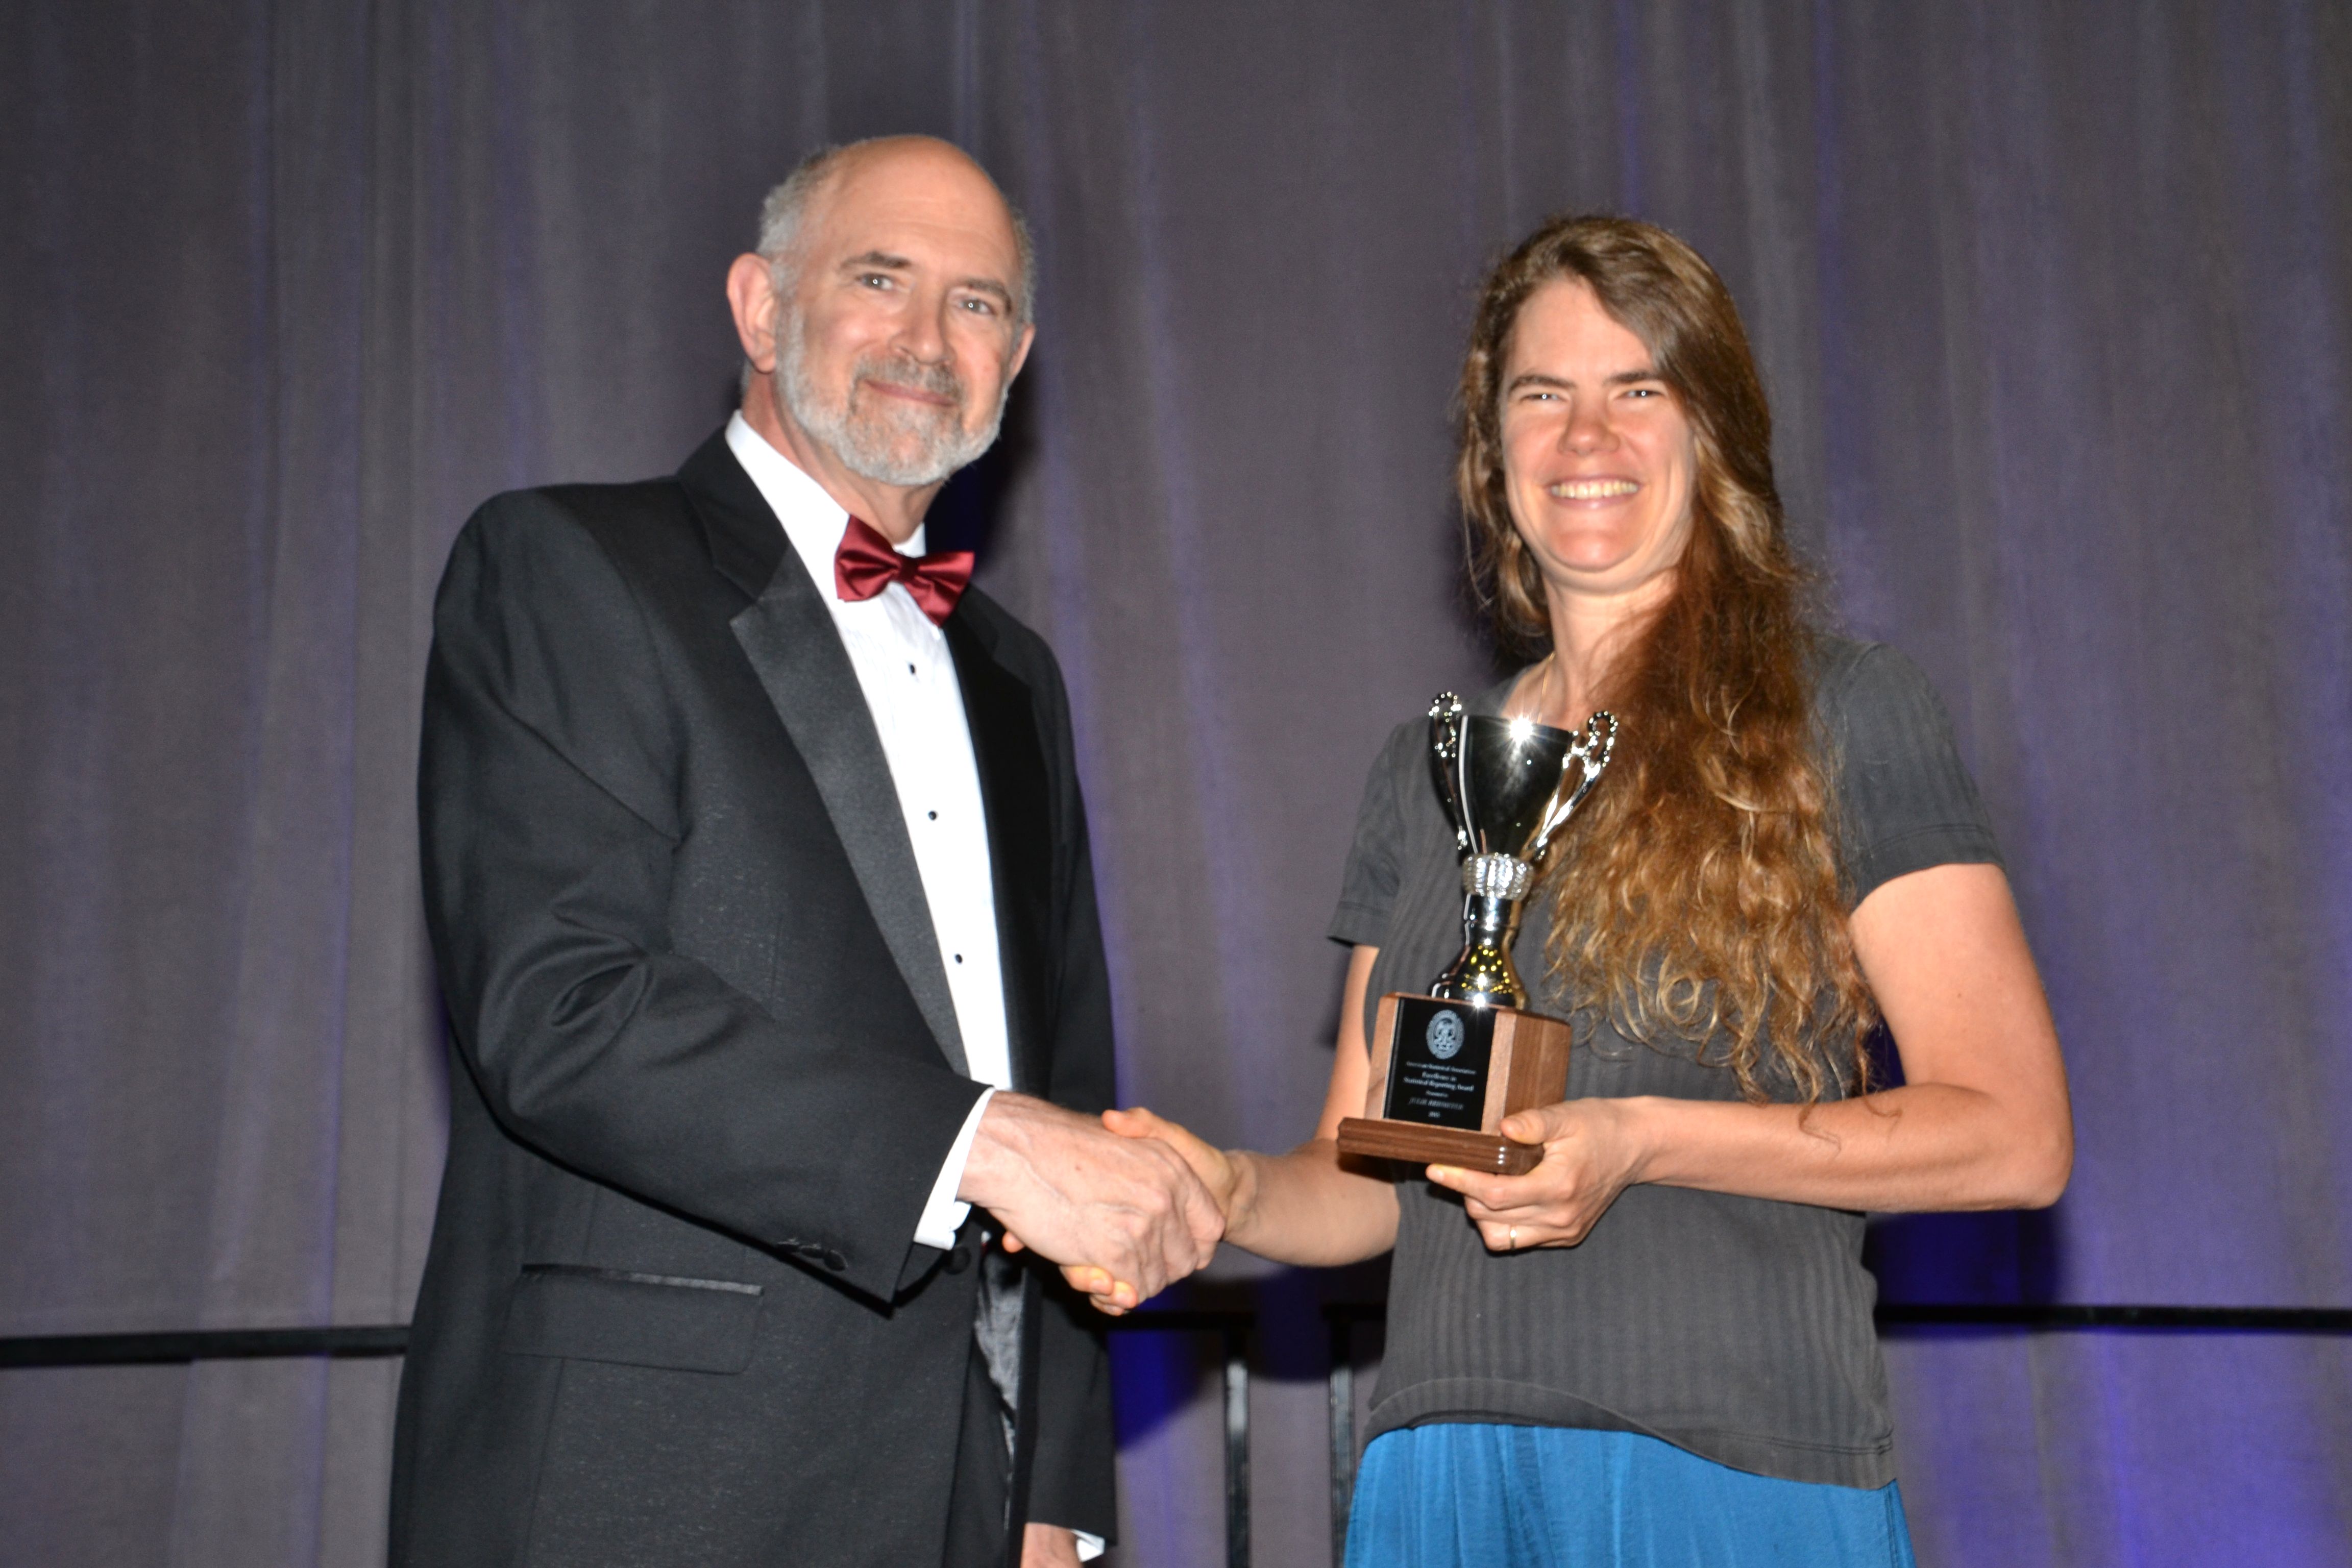 Freelance math and science writer Julie Rehmeyer receives the Excellence in Statistical Reporting Award from ASA President David Morganstein.